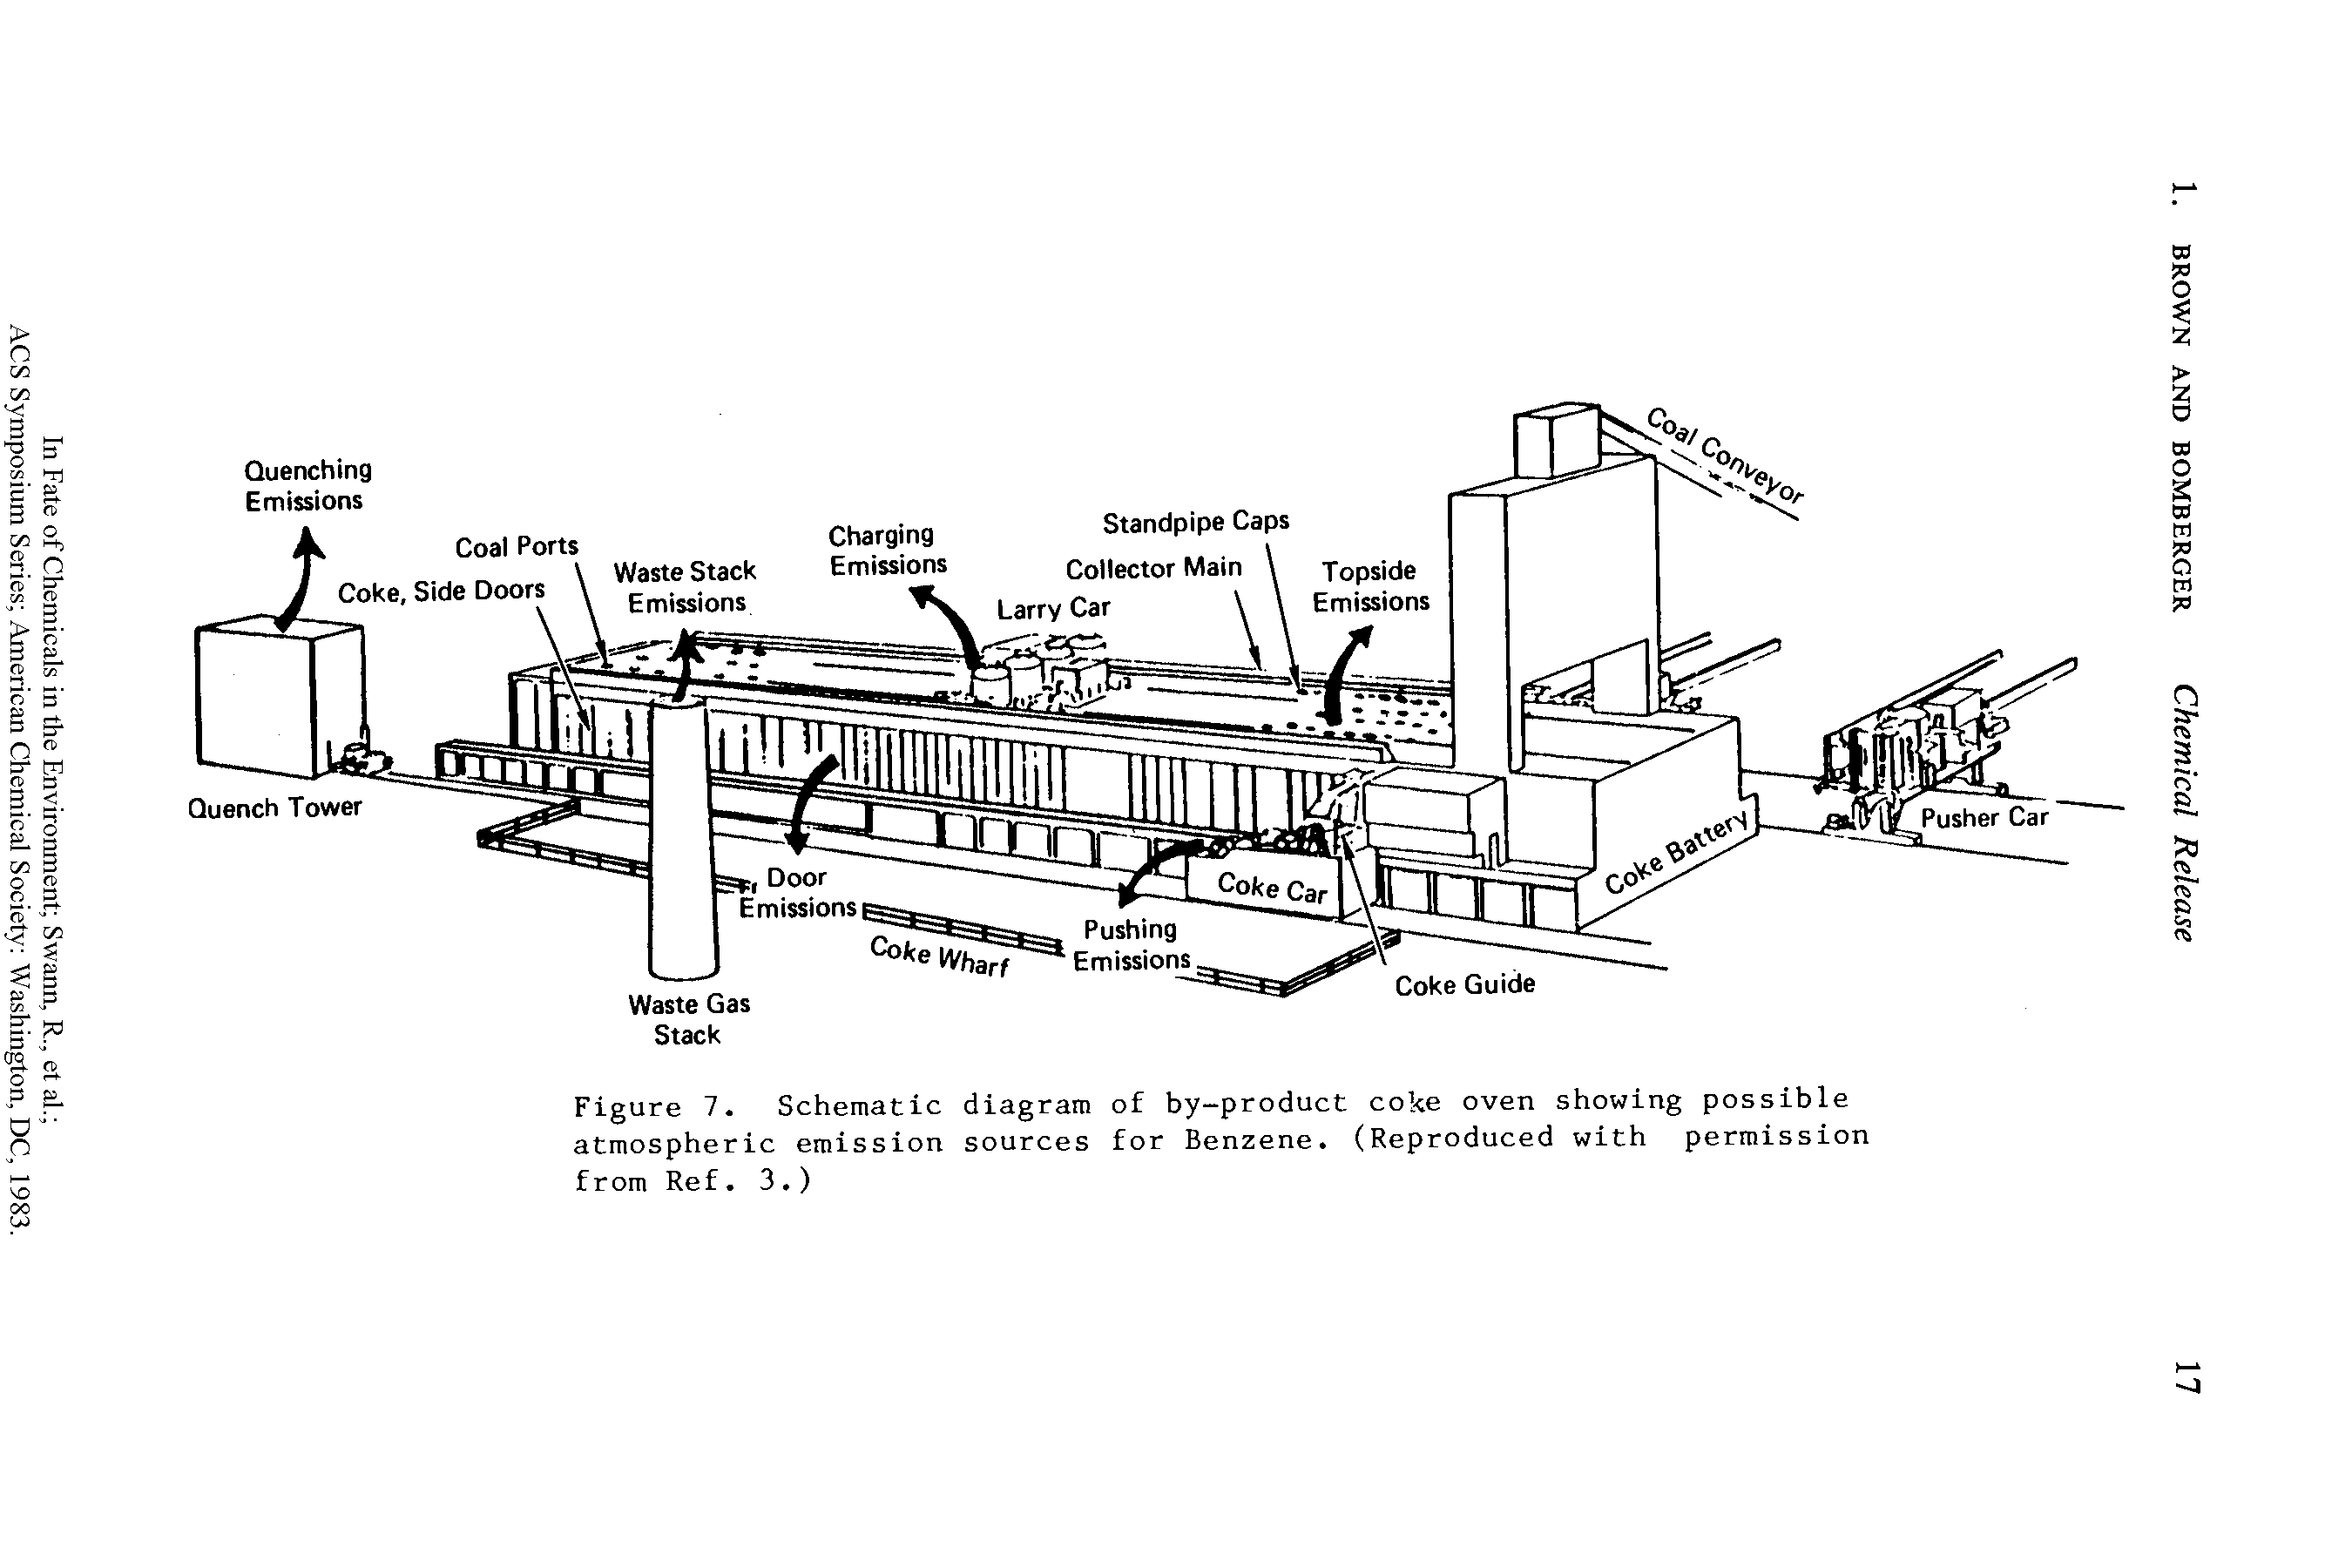 Figure 7. Schematic diagram of by-product coke oven showing possible atmospheric emission sources for Benzene. (Reproduced with permission from Ref. 3.)...